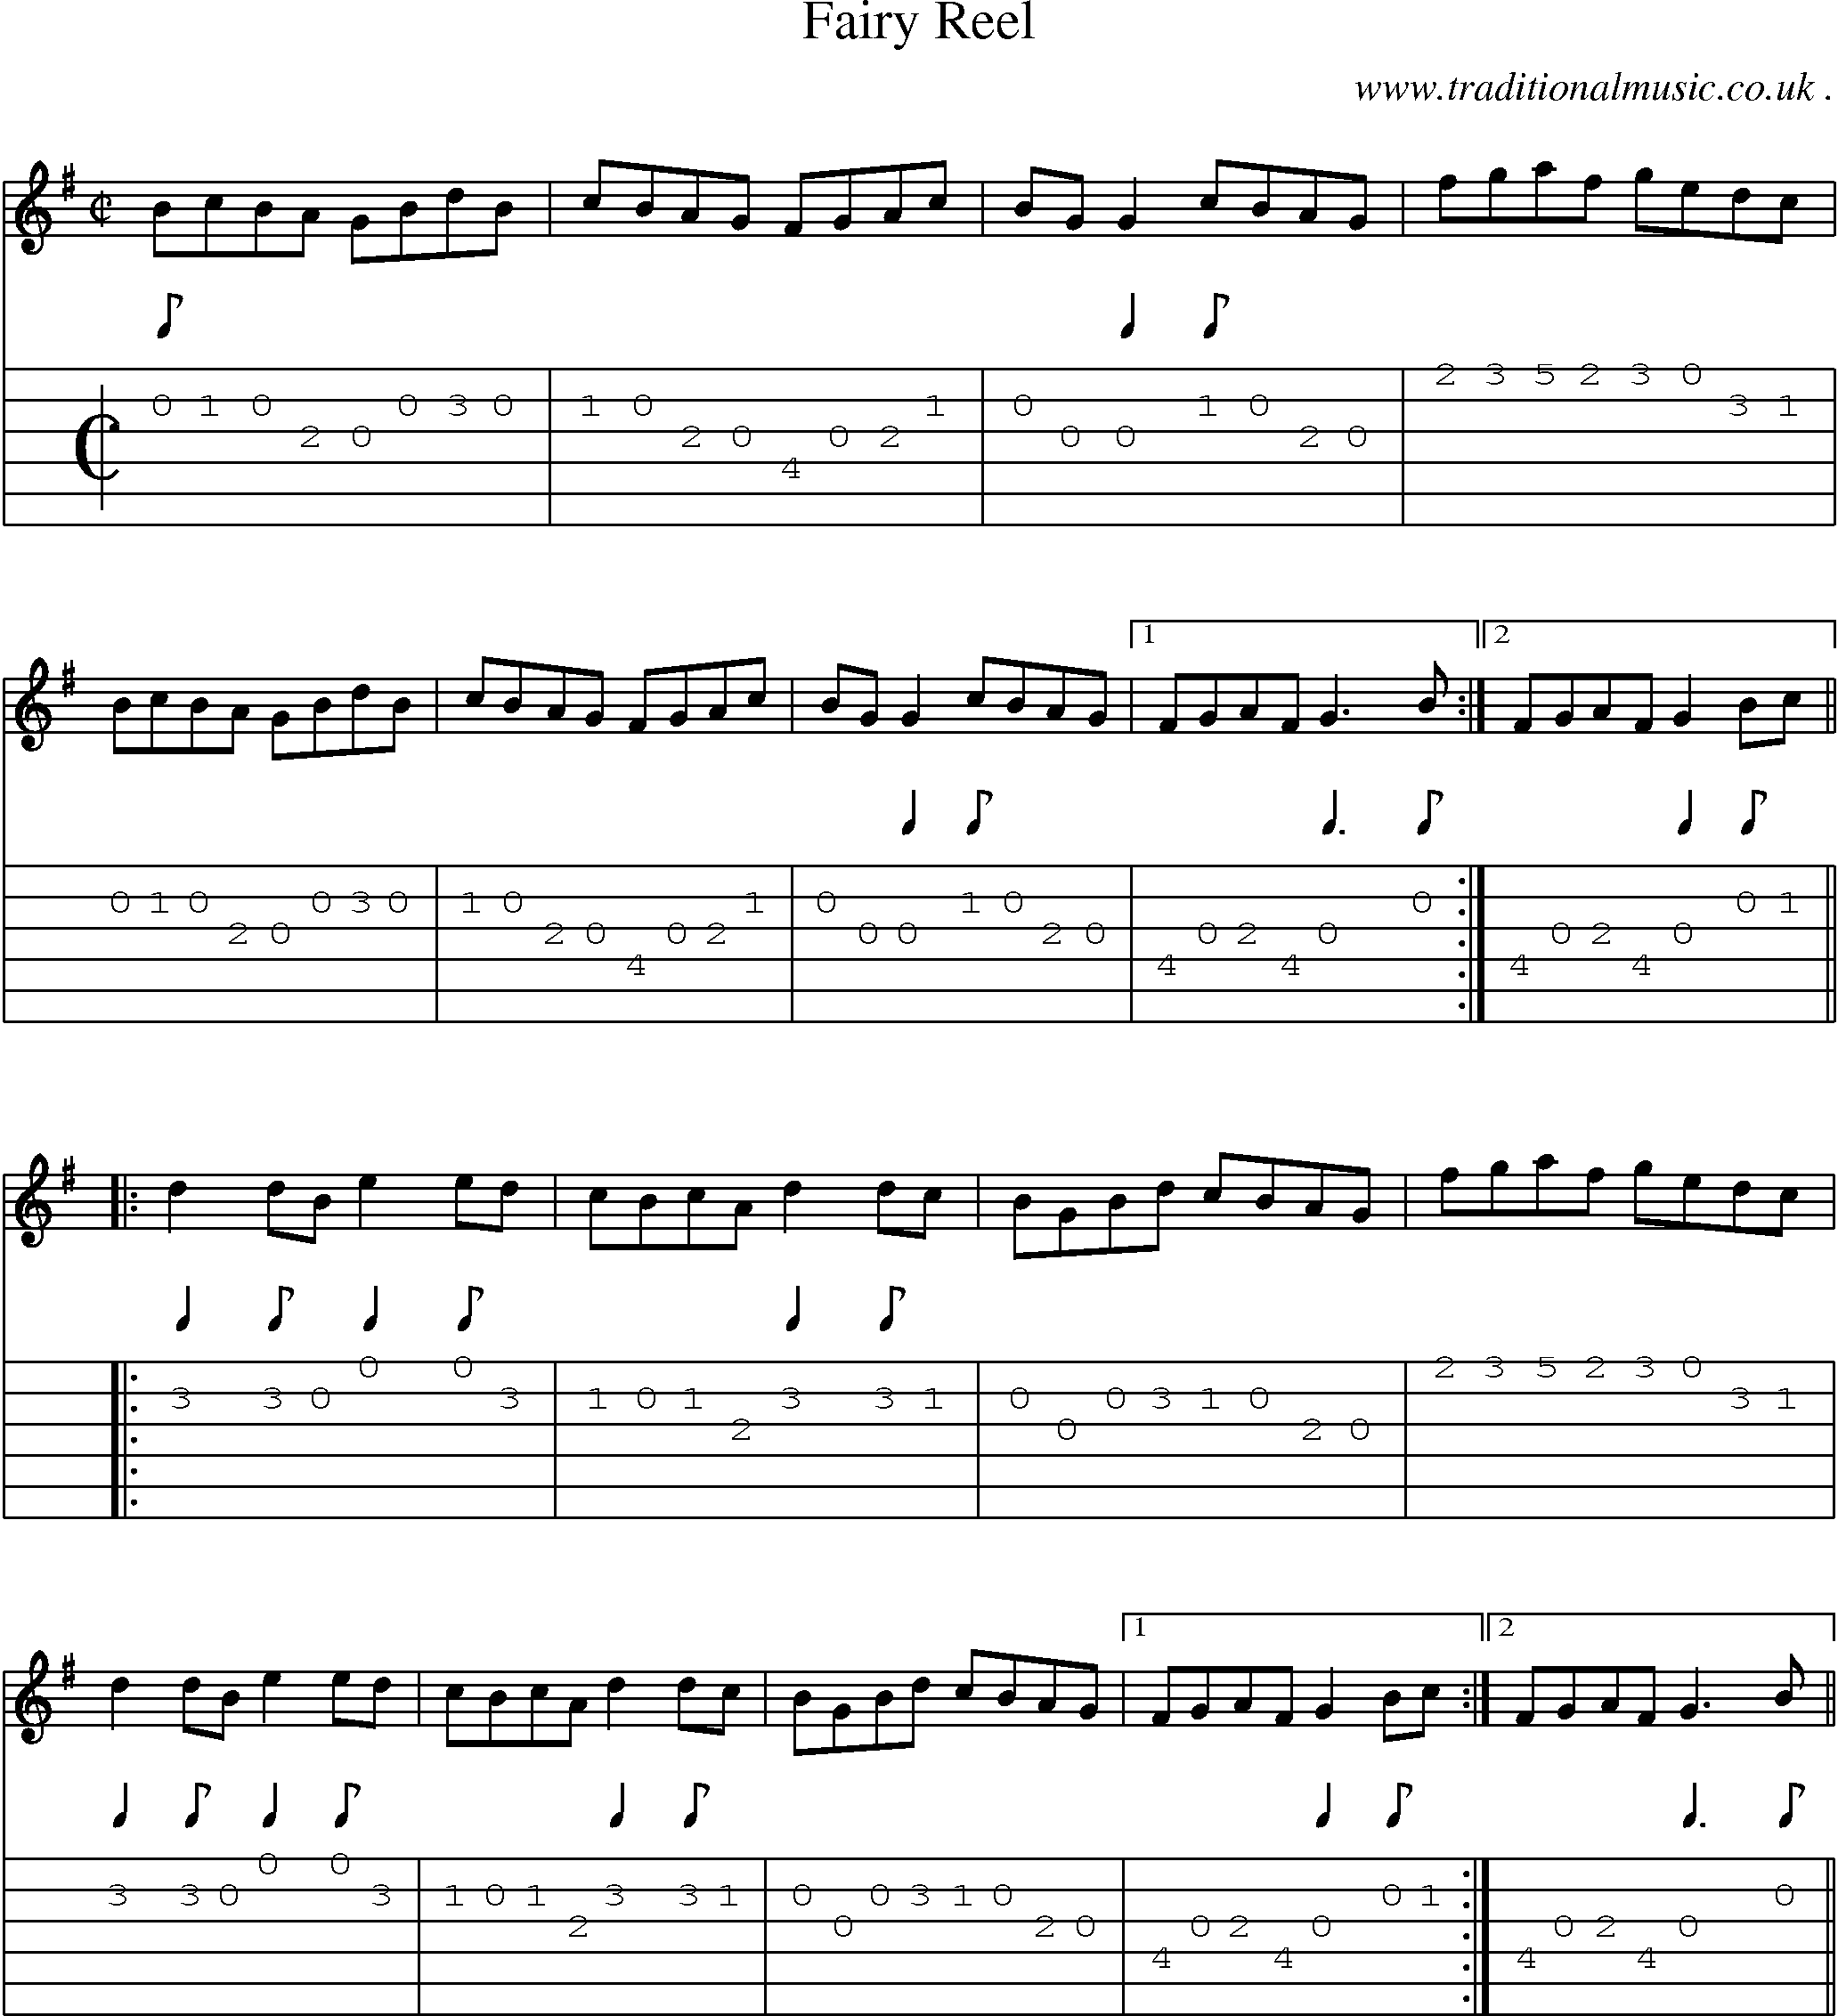 Sheet-Music and Guitar Tabs for Fairy Reel